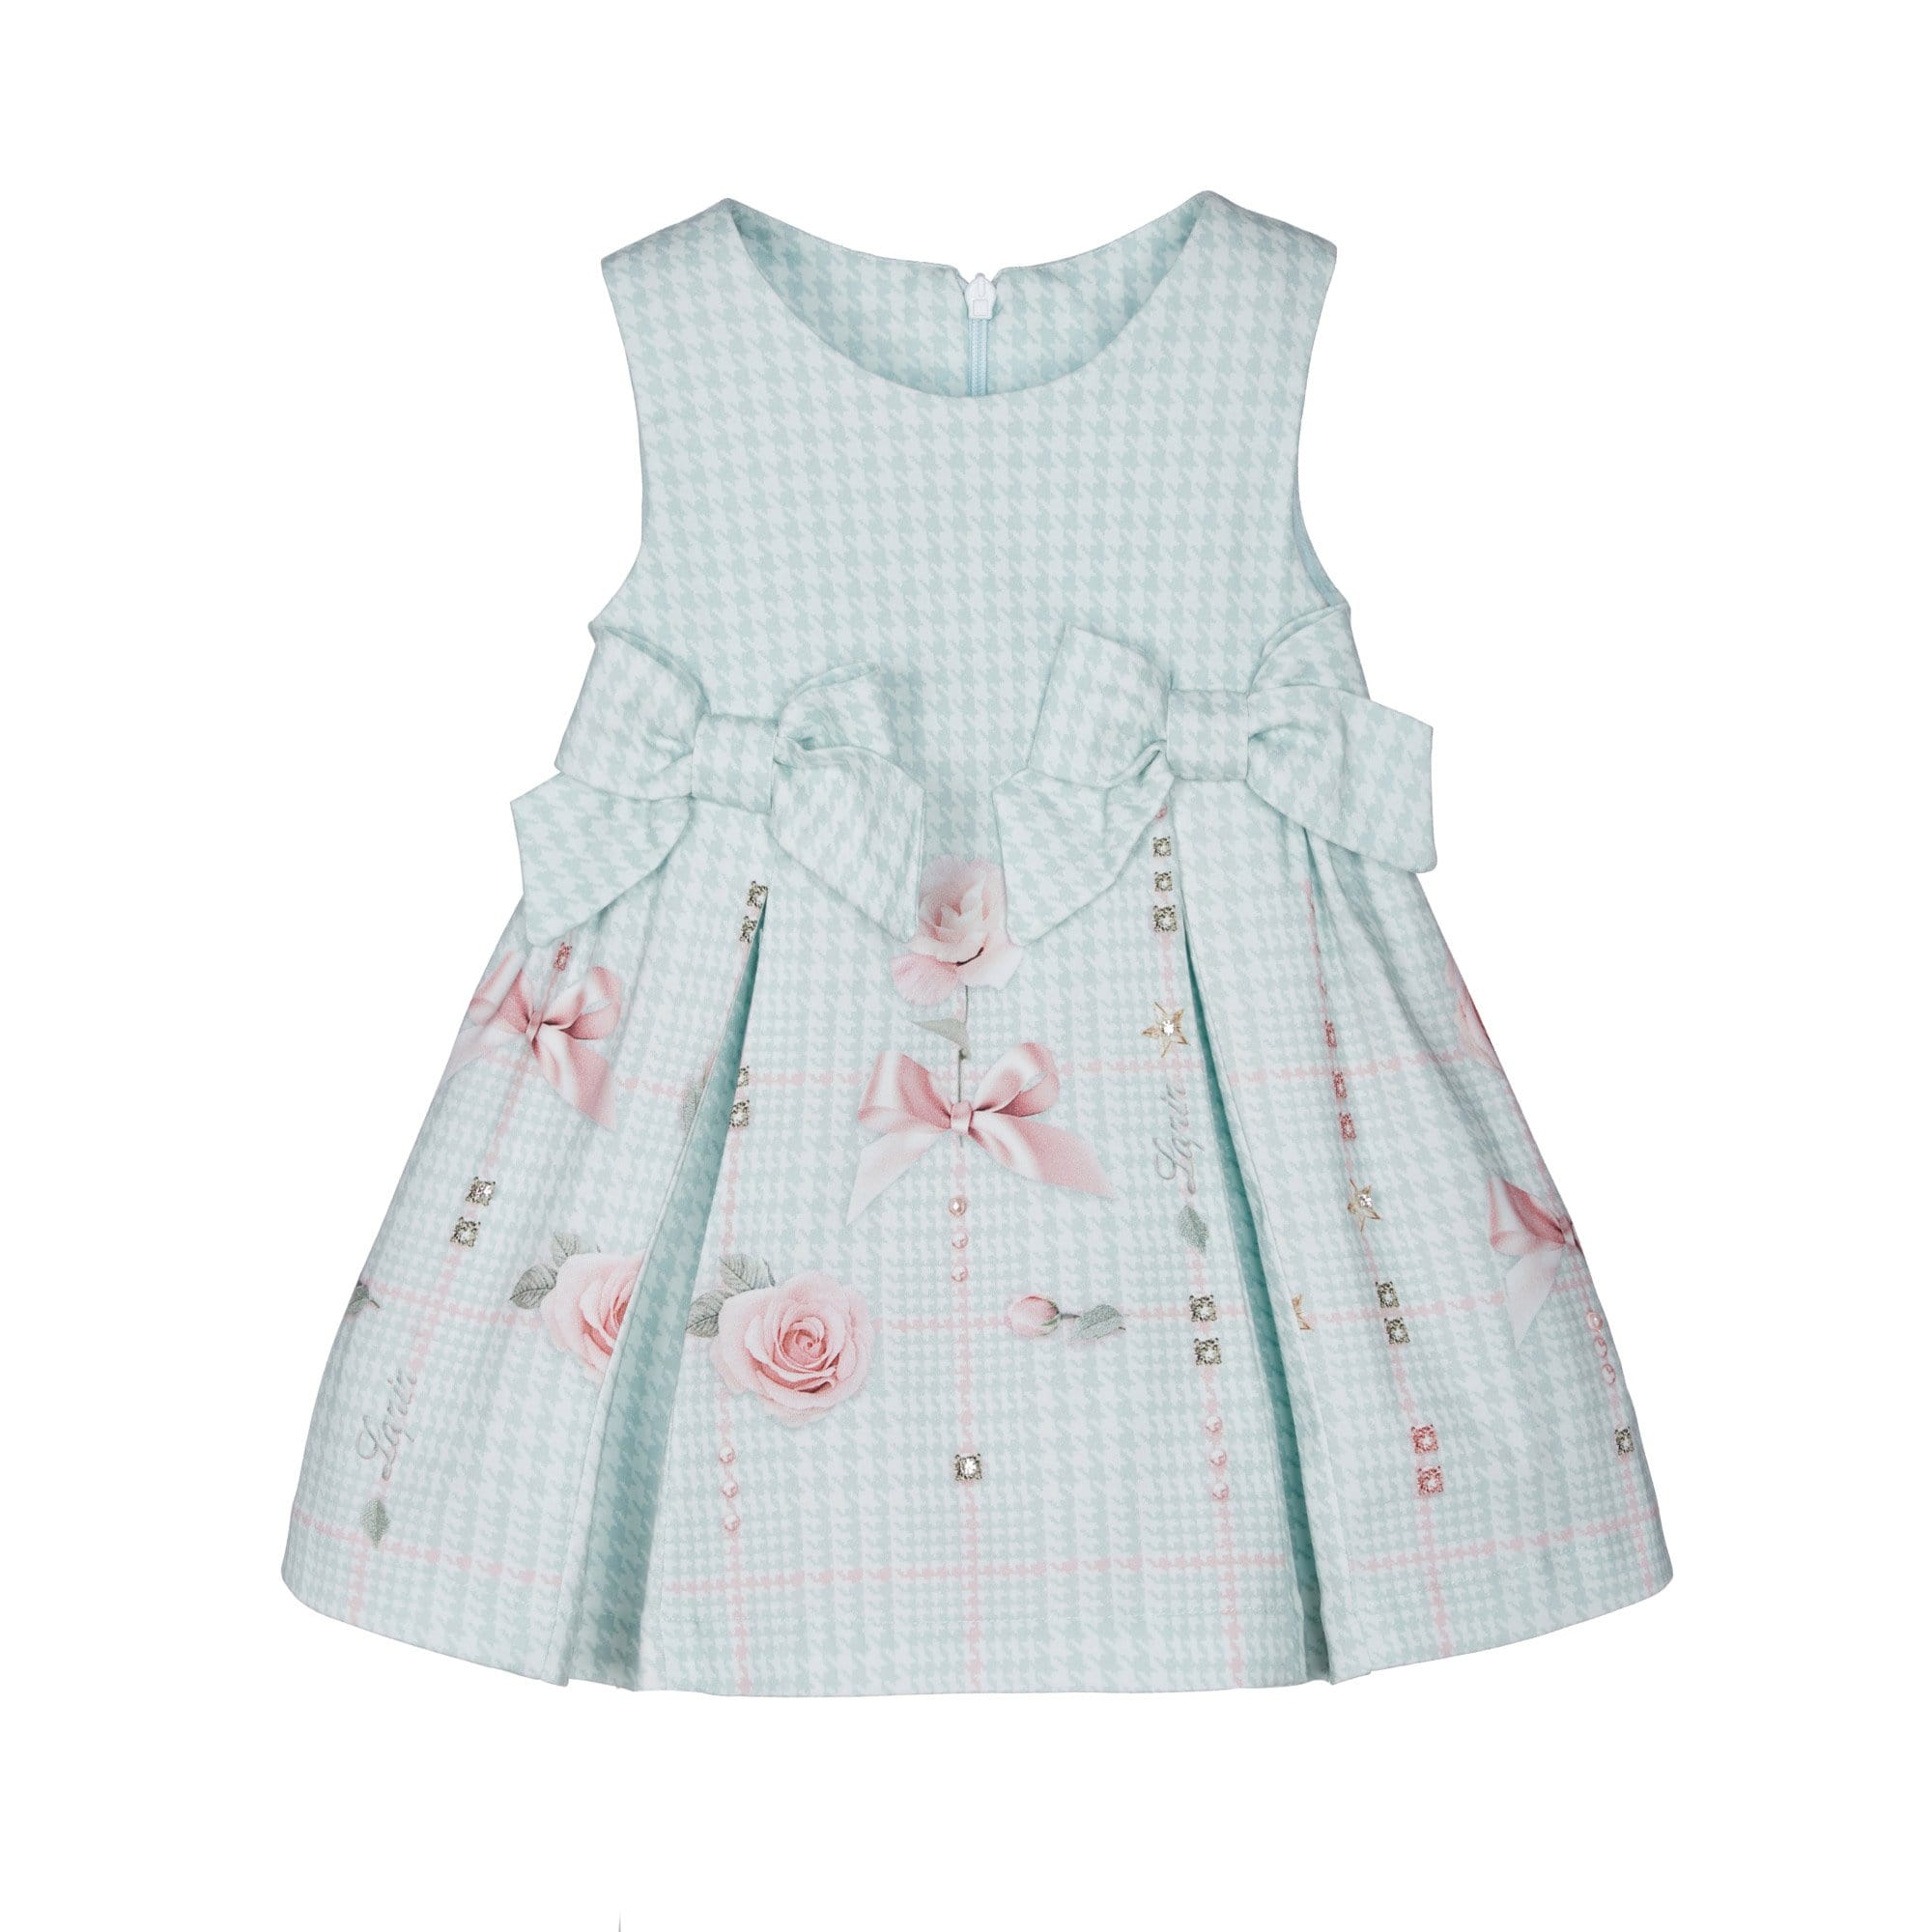 LAPIN HOUSE - Pinafore With Blouse - Mint